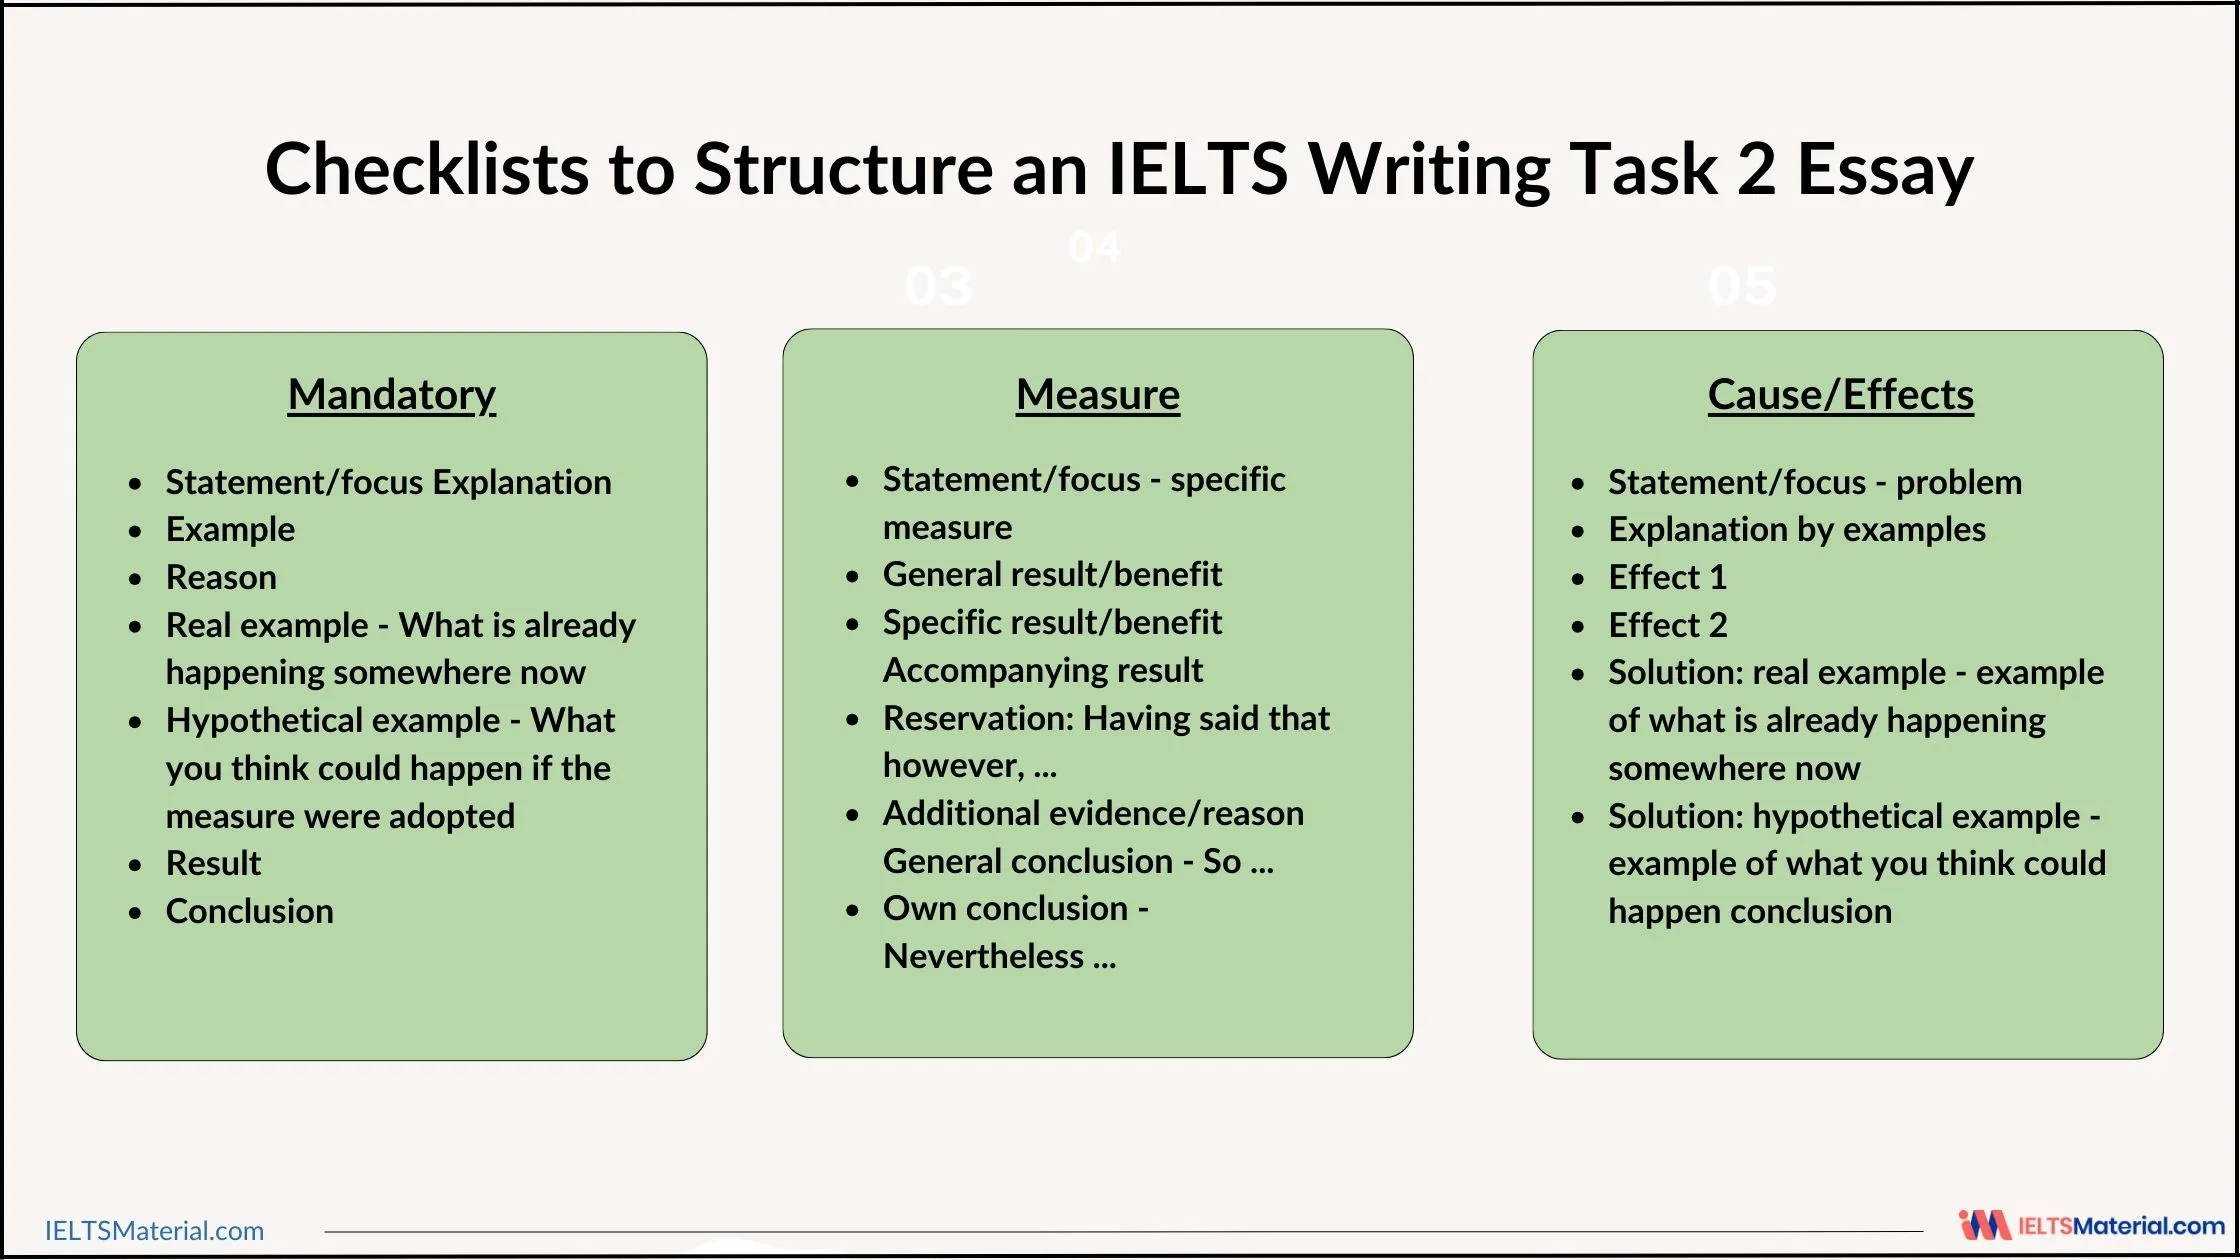 Checklist to Structure IELTS Writing Task 2 Essays